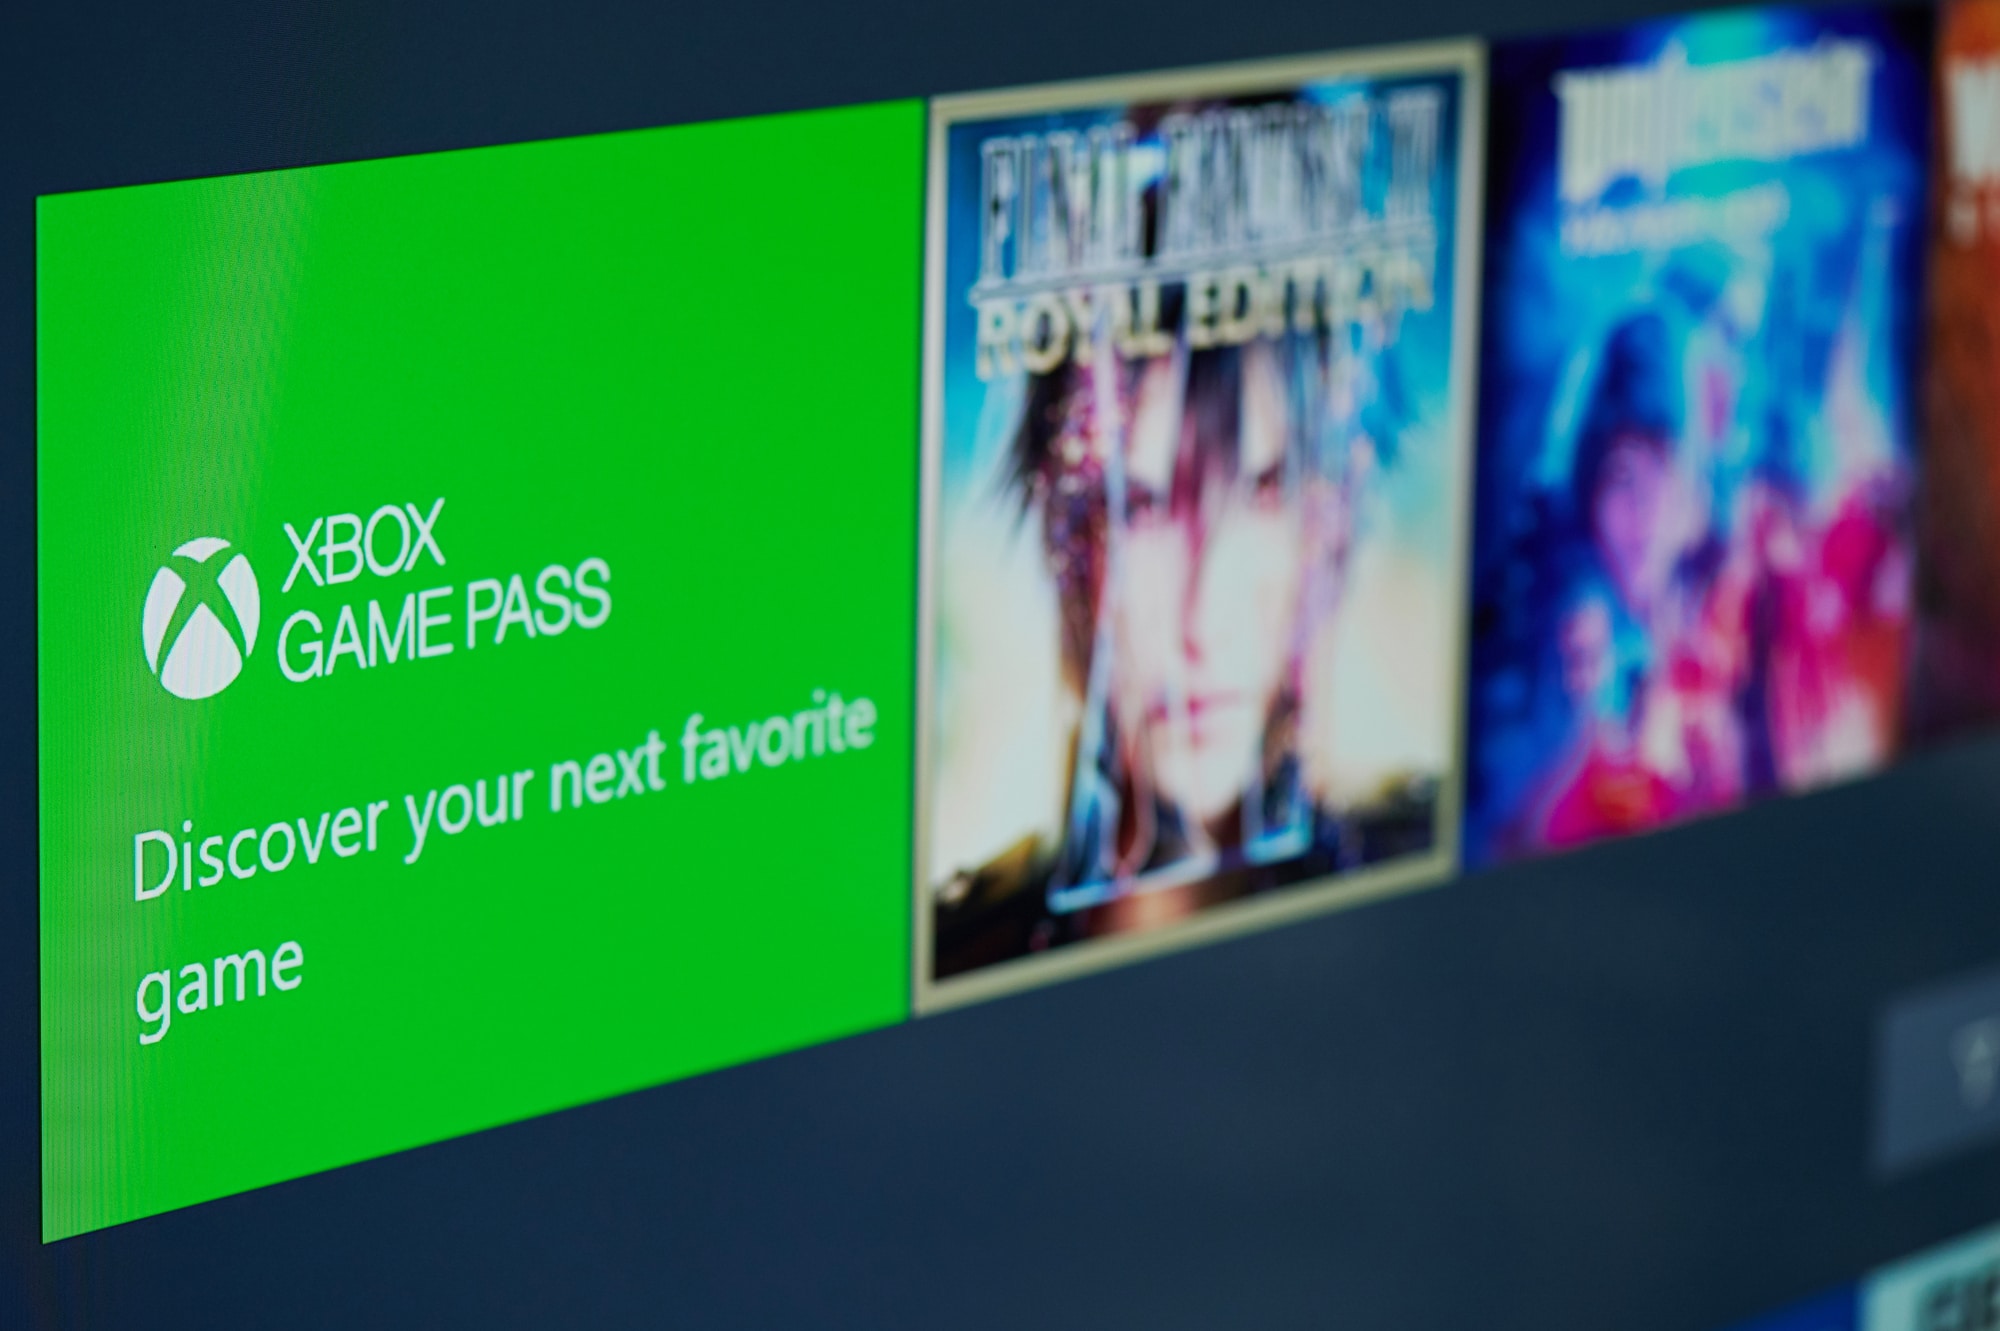 Microsoft is working on a family plan for the Xbox Box Game Pass thumbnail